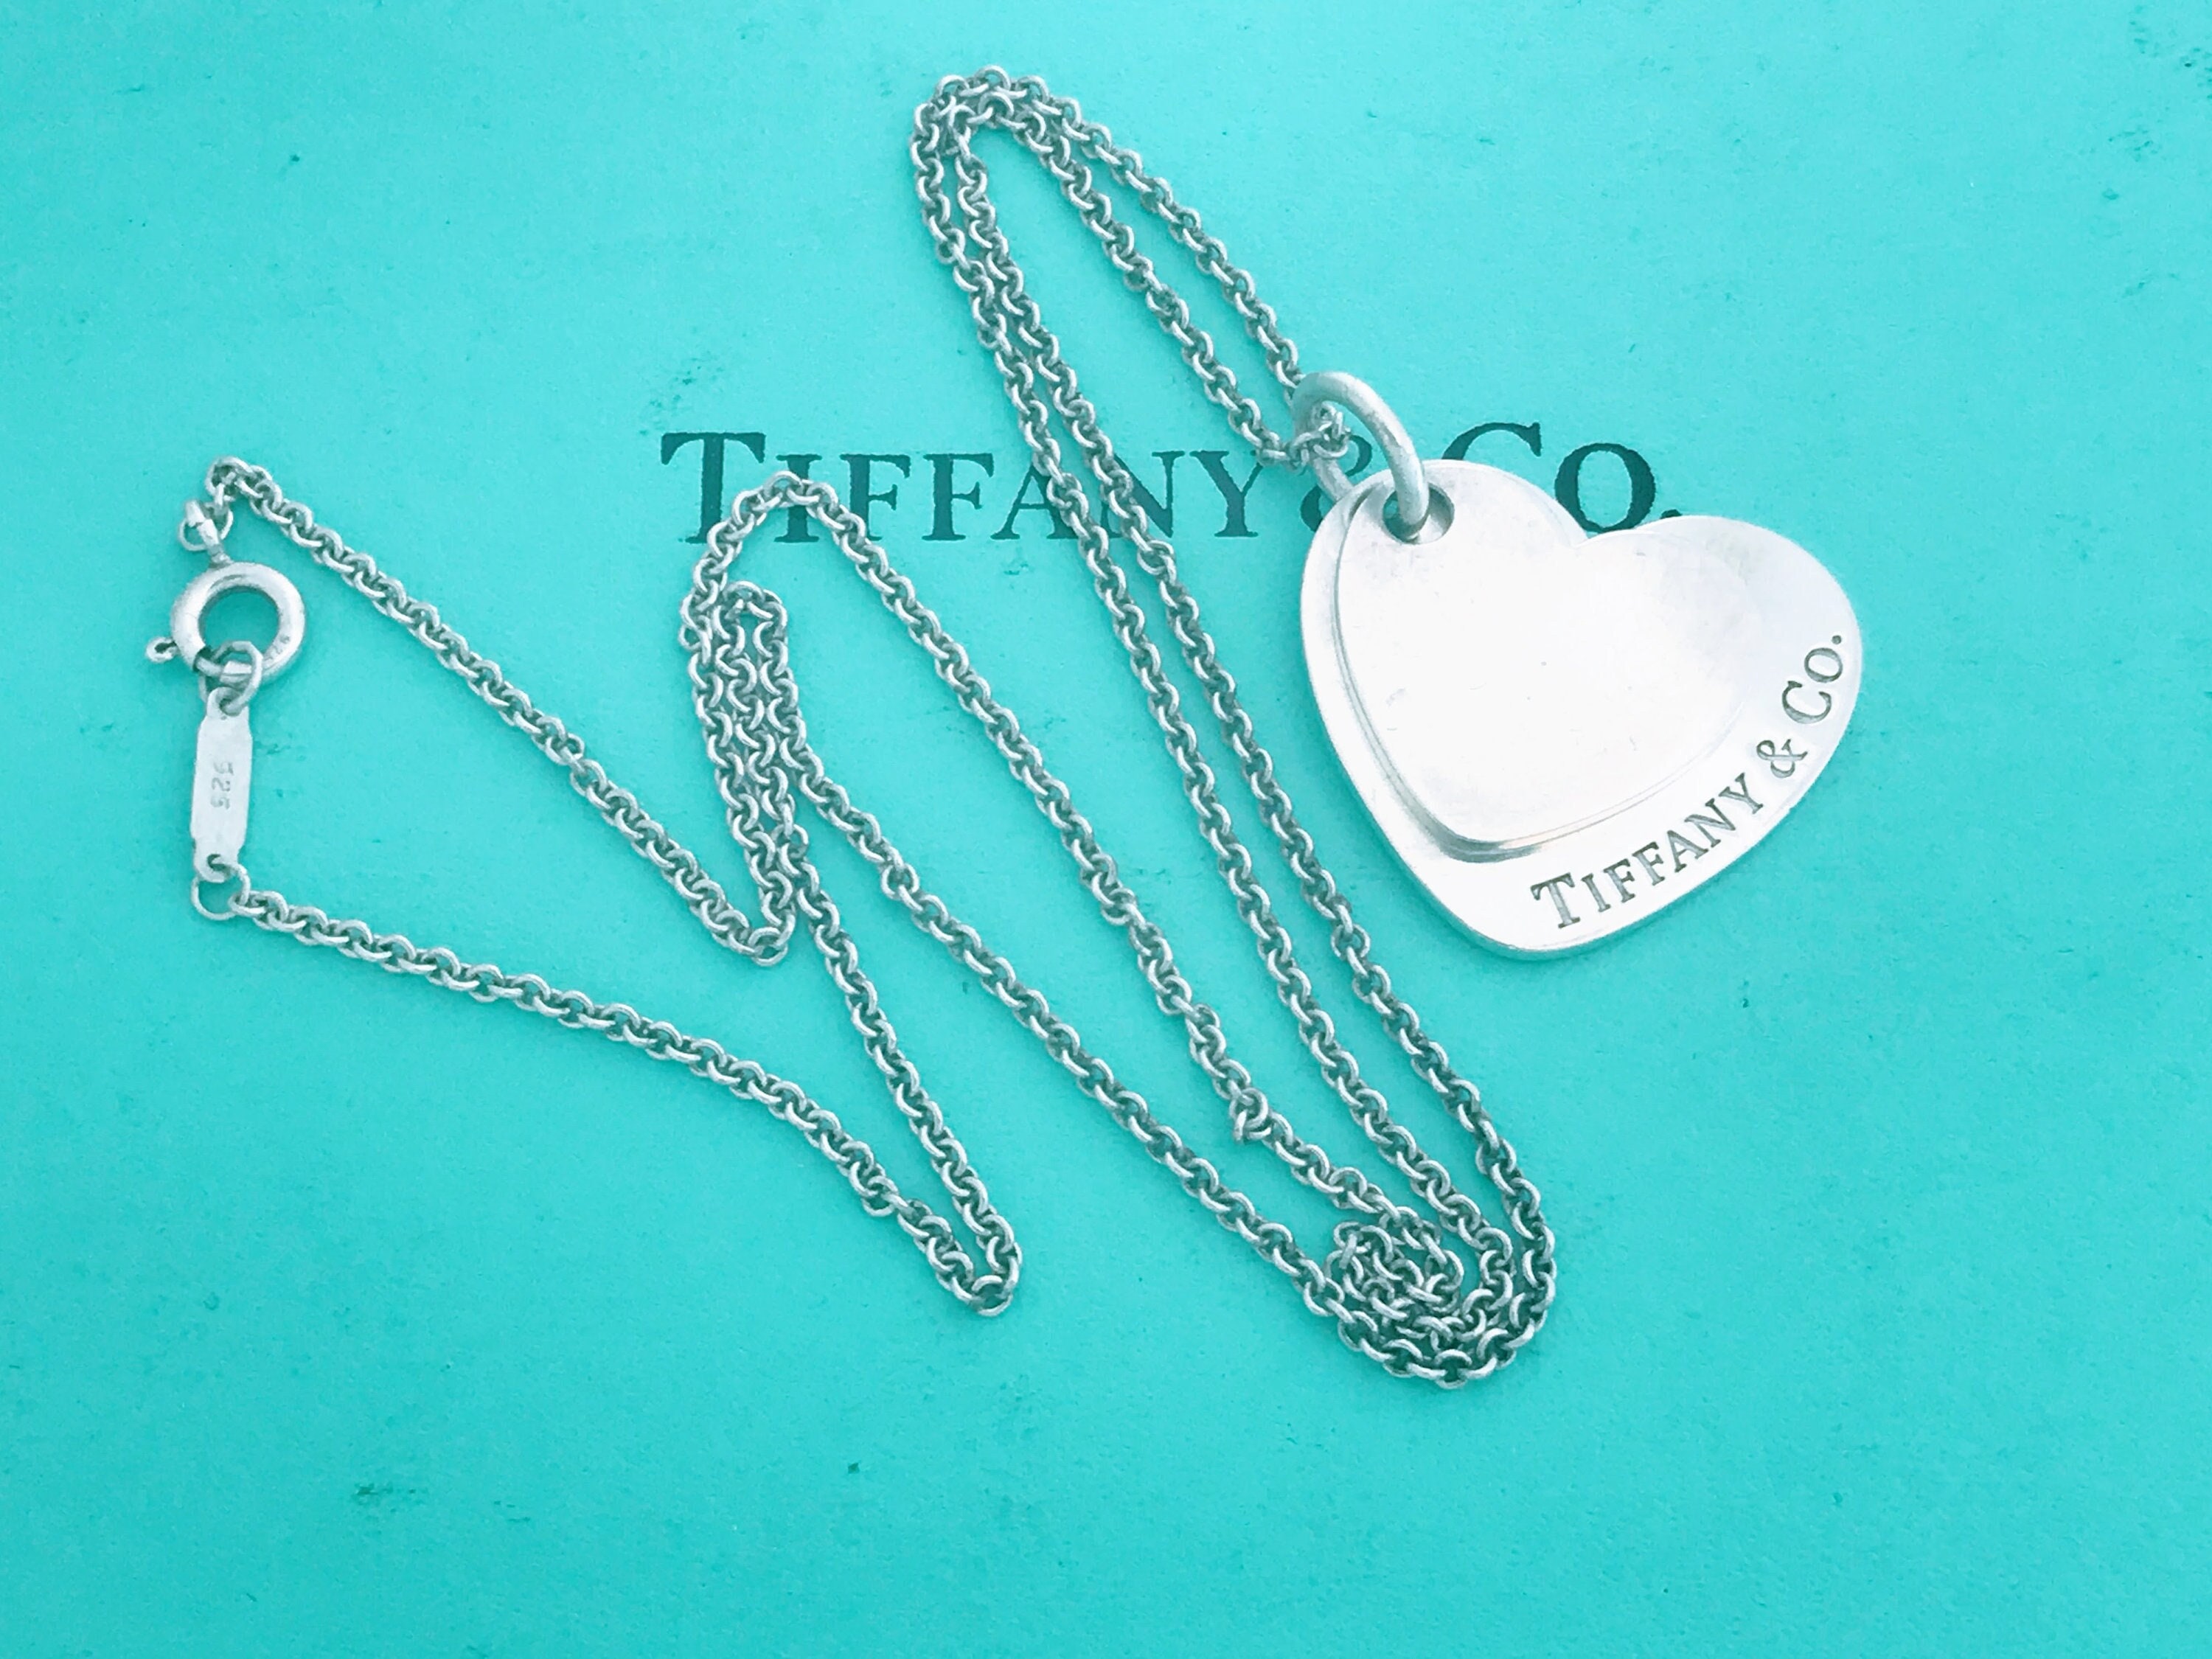 Tiffany Lock Pendant in Rose Gold with Diamonds, Large | Tiffany & Co.